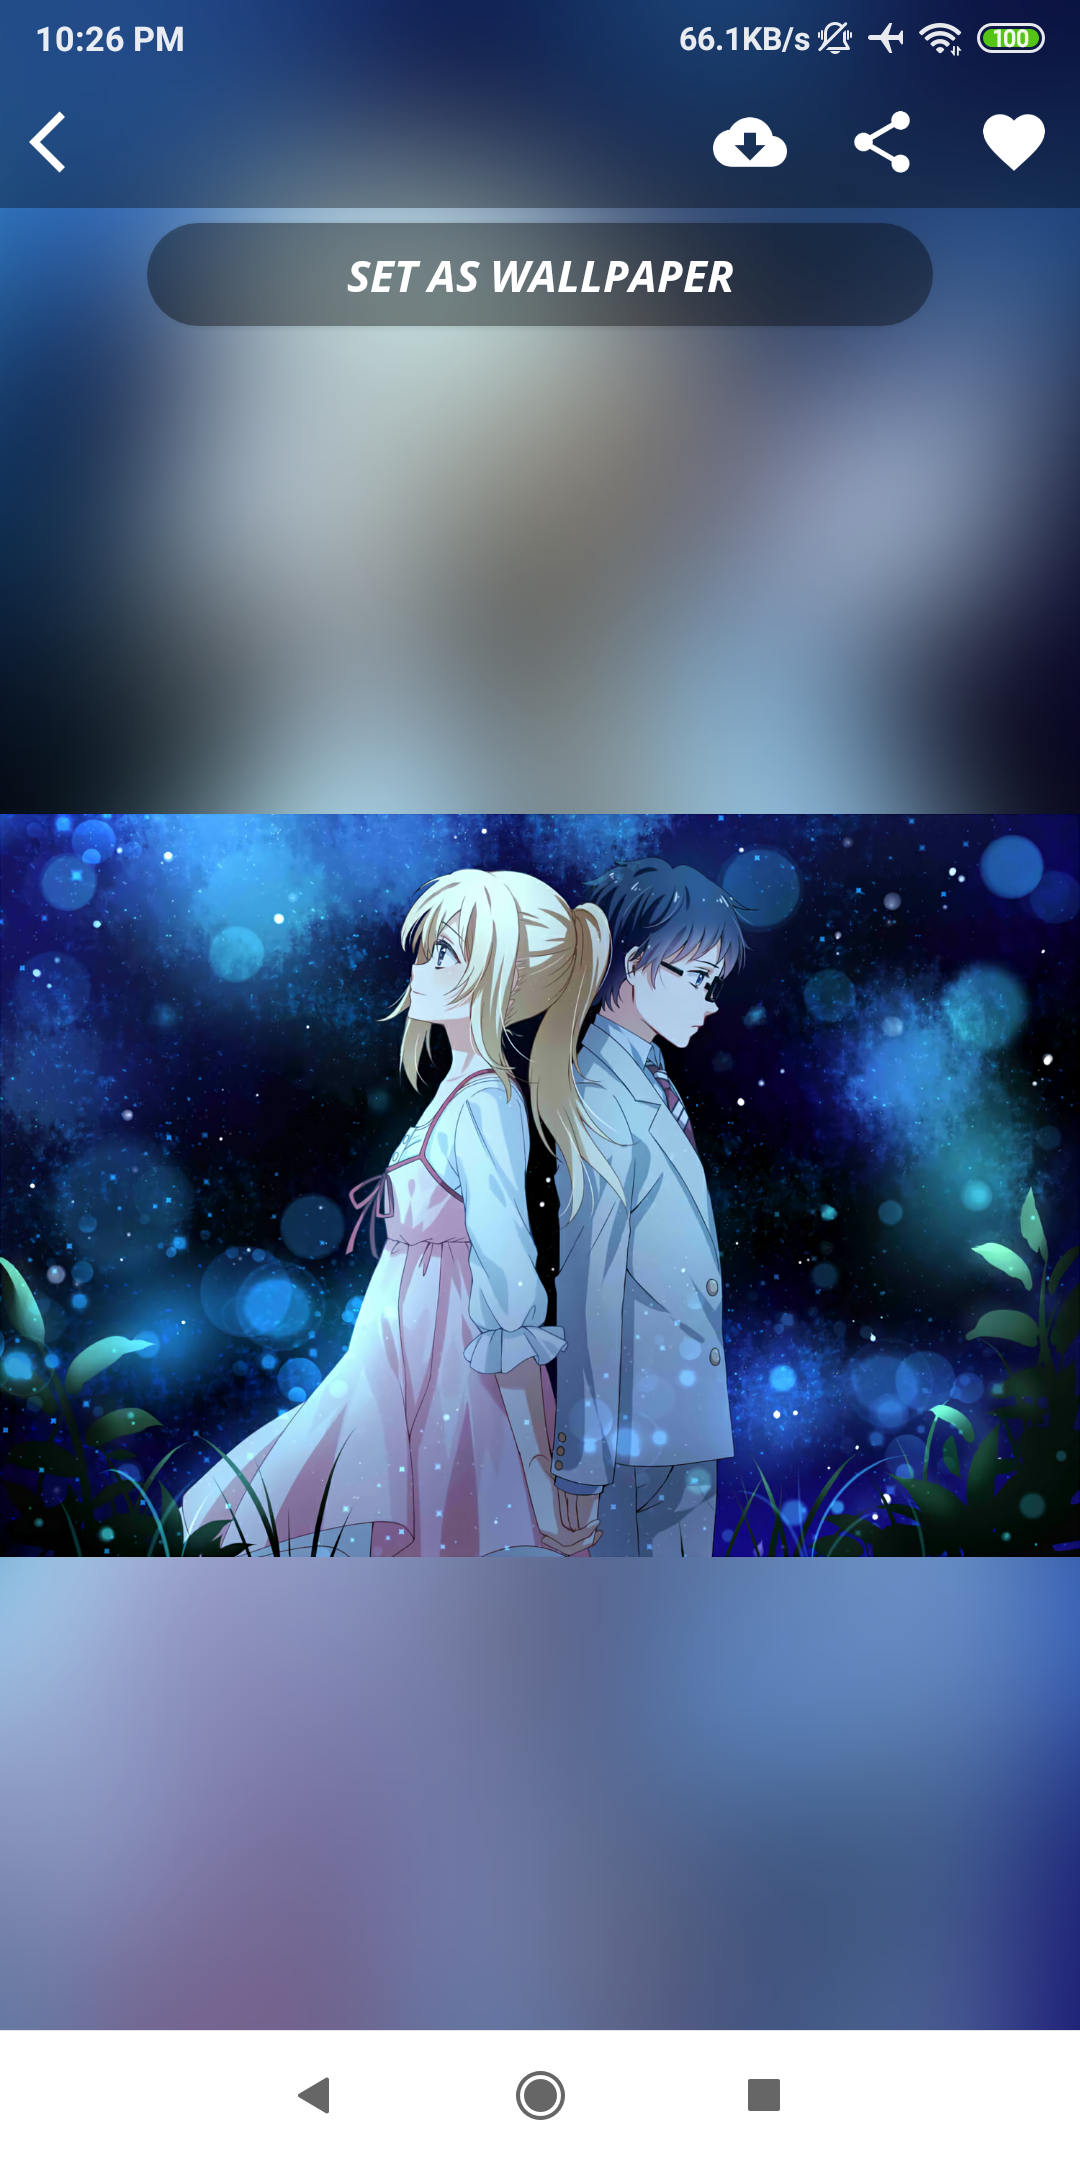 +100000 Anime Wallpaper APK 4.2.1 for Android – Download +100000 Anime